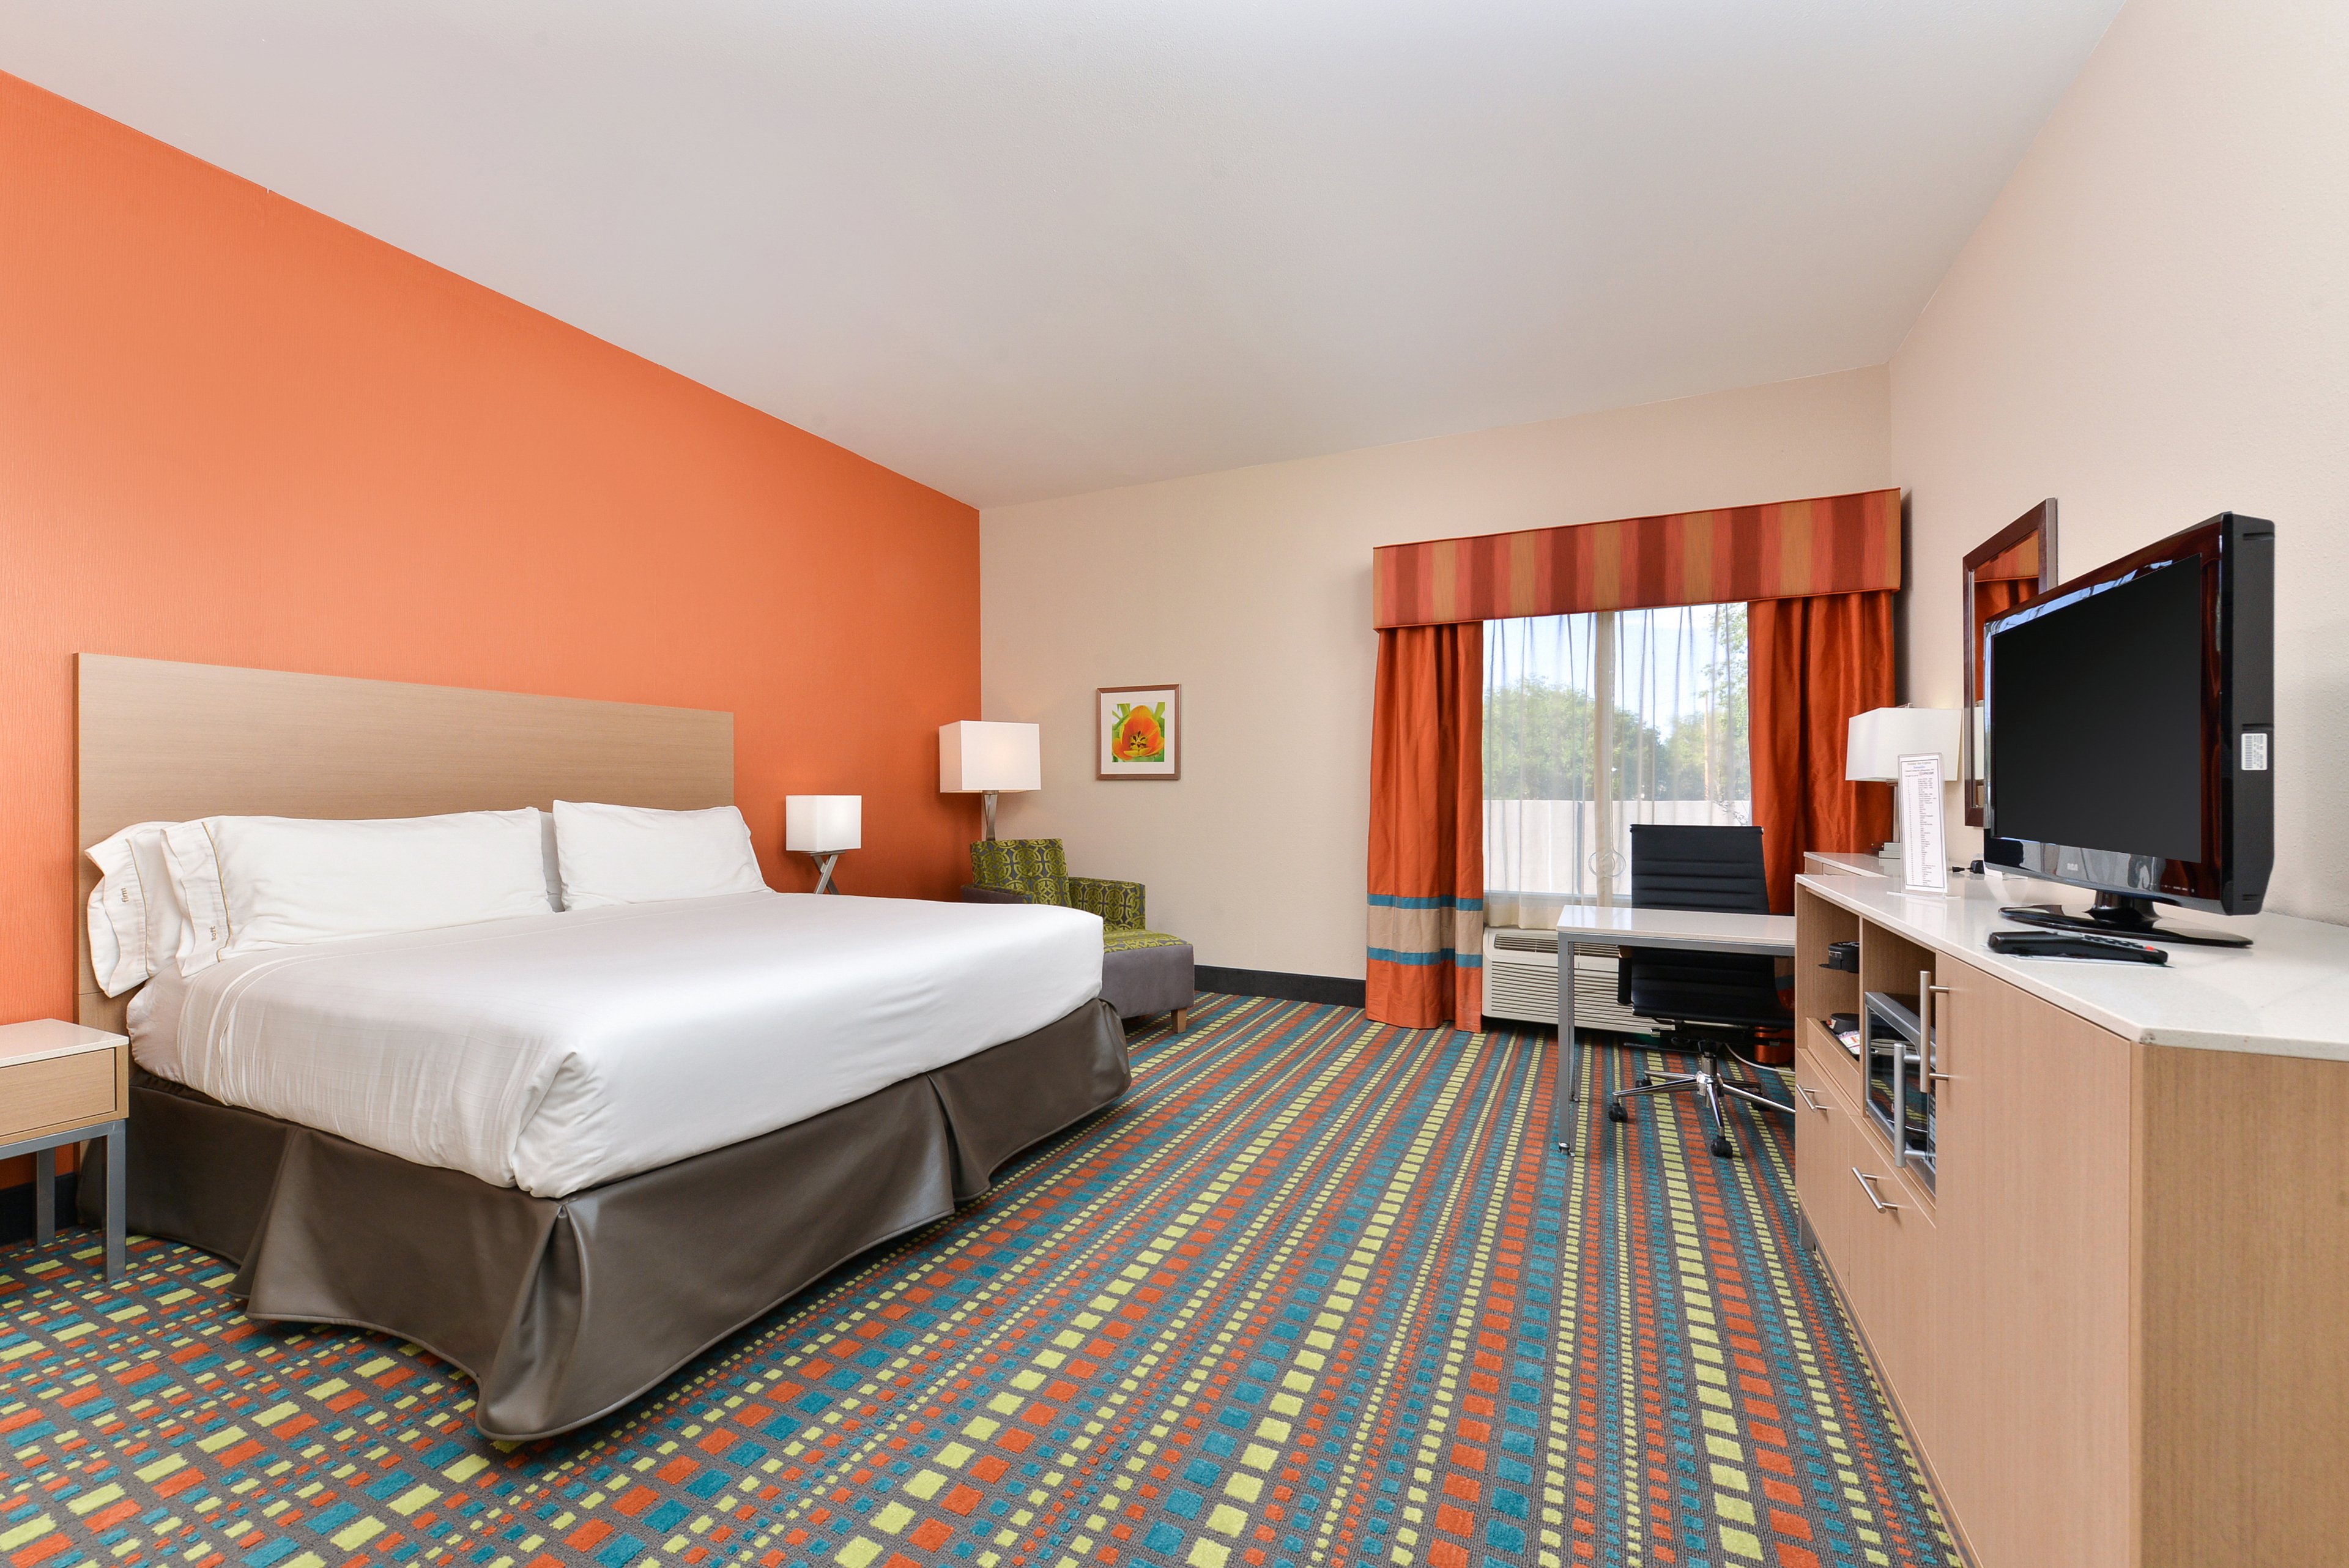 Enjoy a great nights rest in our spacious guest room.